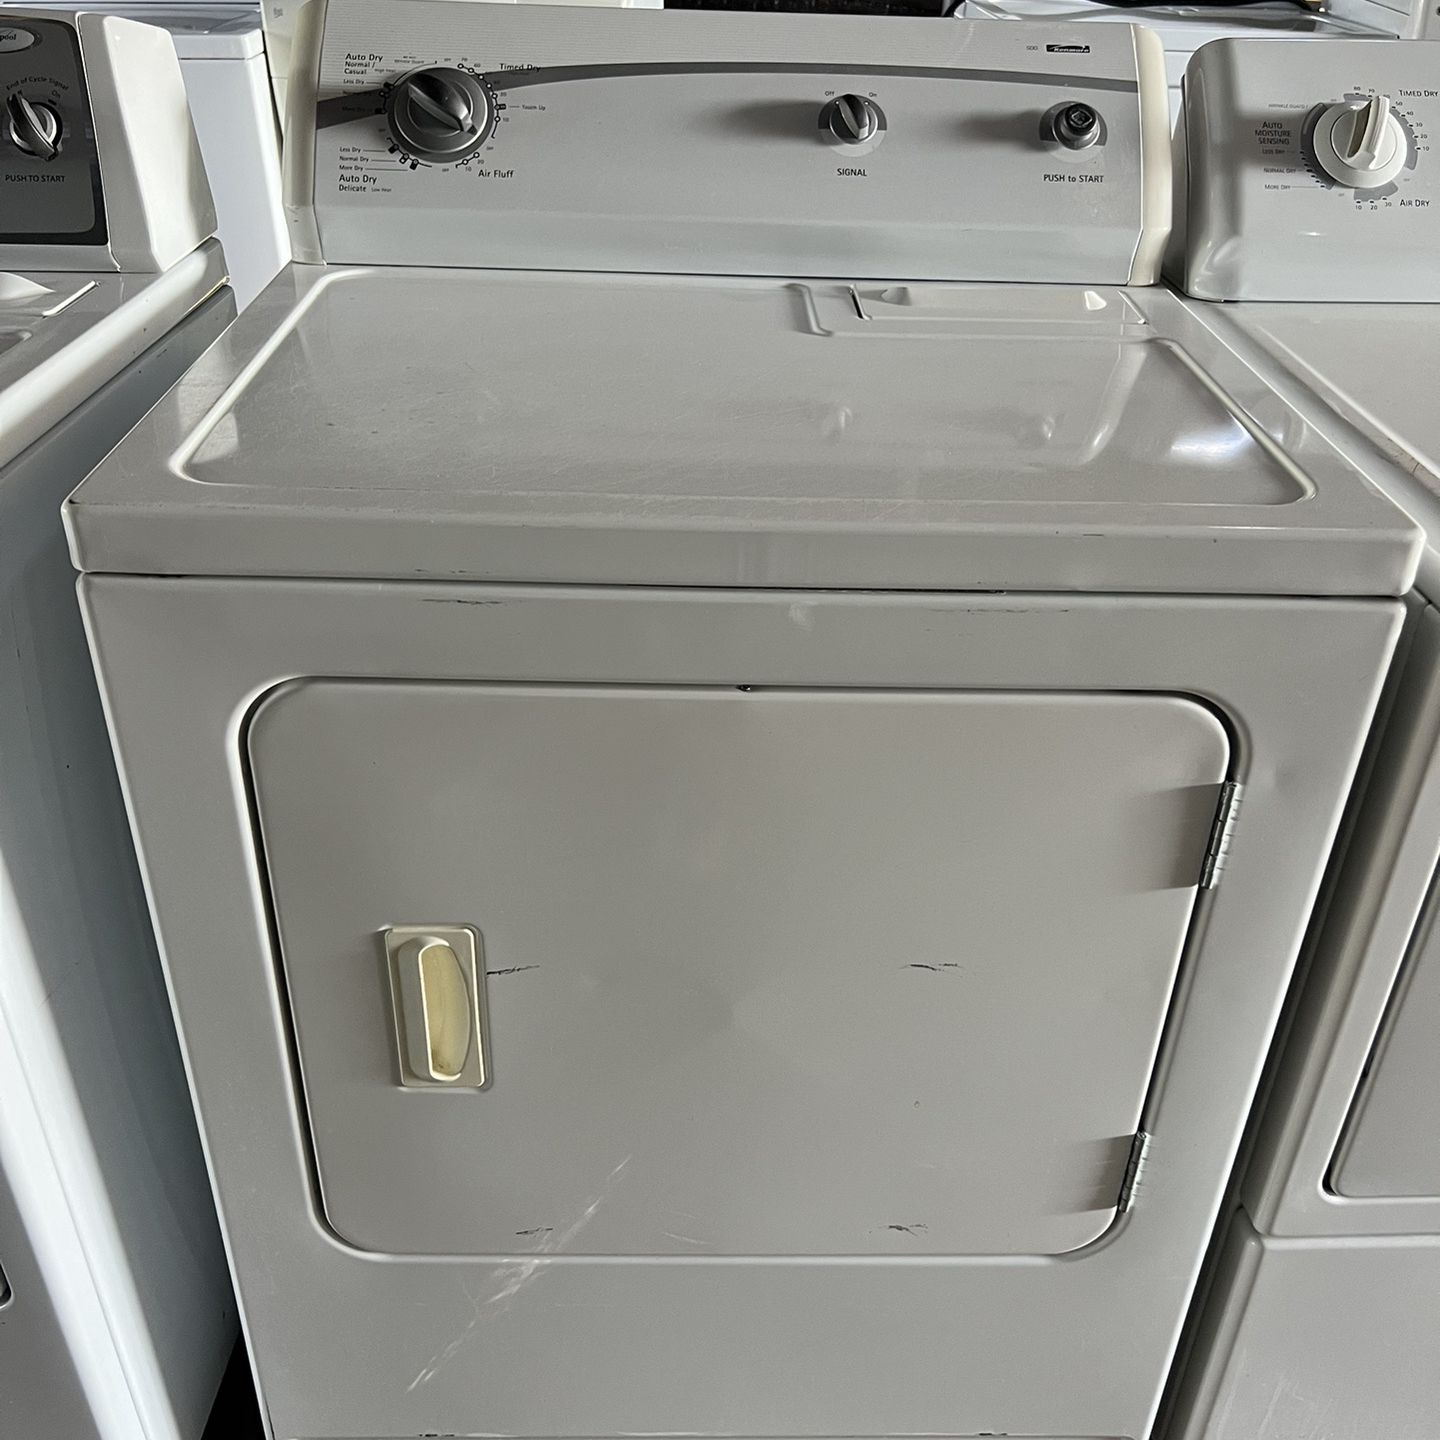 Kenmore Single Dryer   60 day warranty/ Located at:📍5415 Carmack Rd Tampa Fl 33610📍 